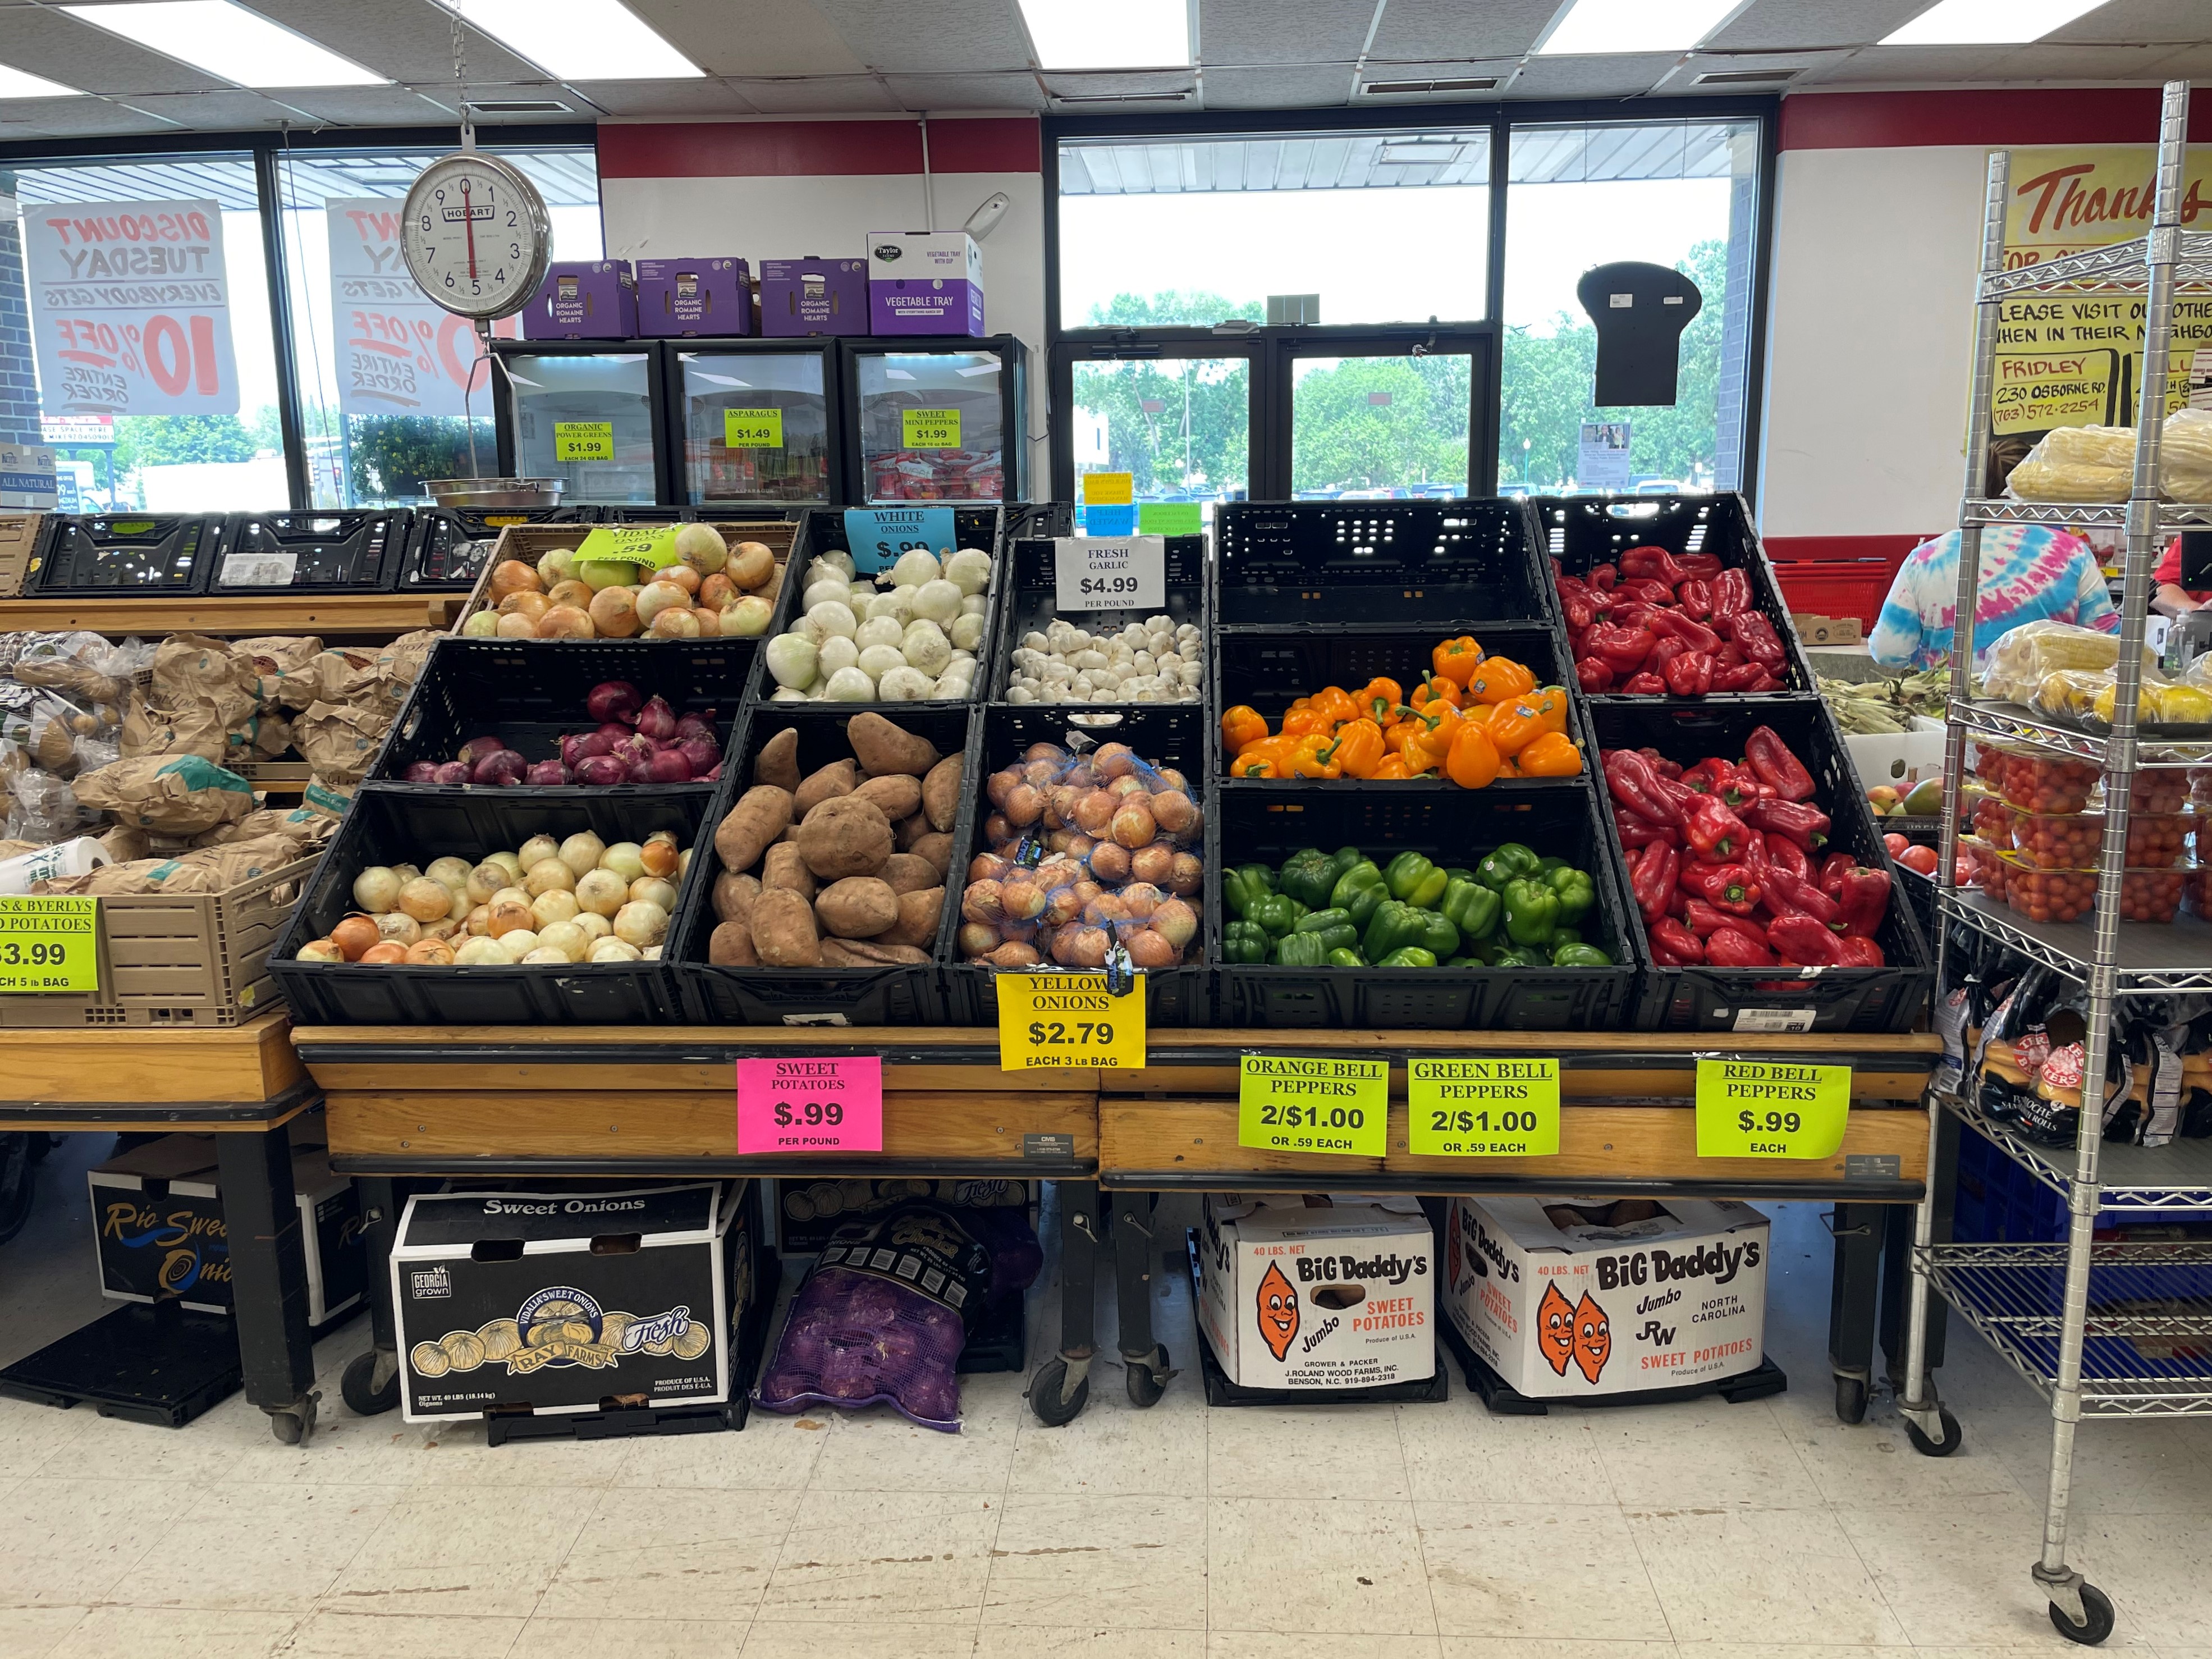 Organic Green Seedless - Mike's Discount Foods - Fridley